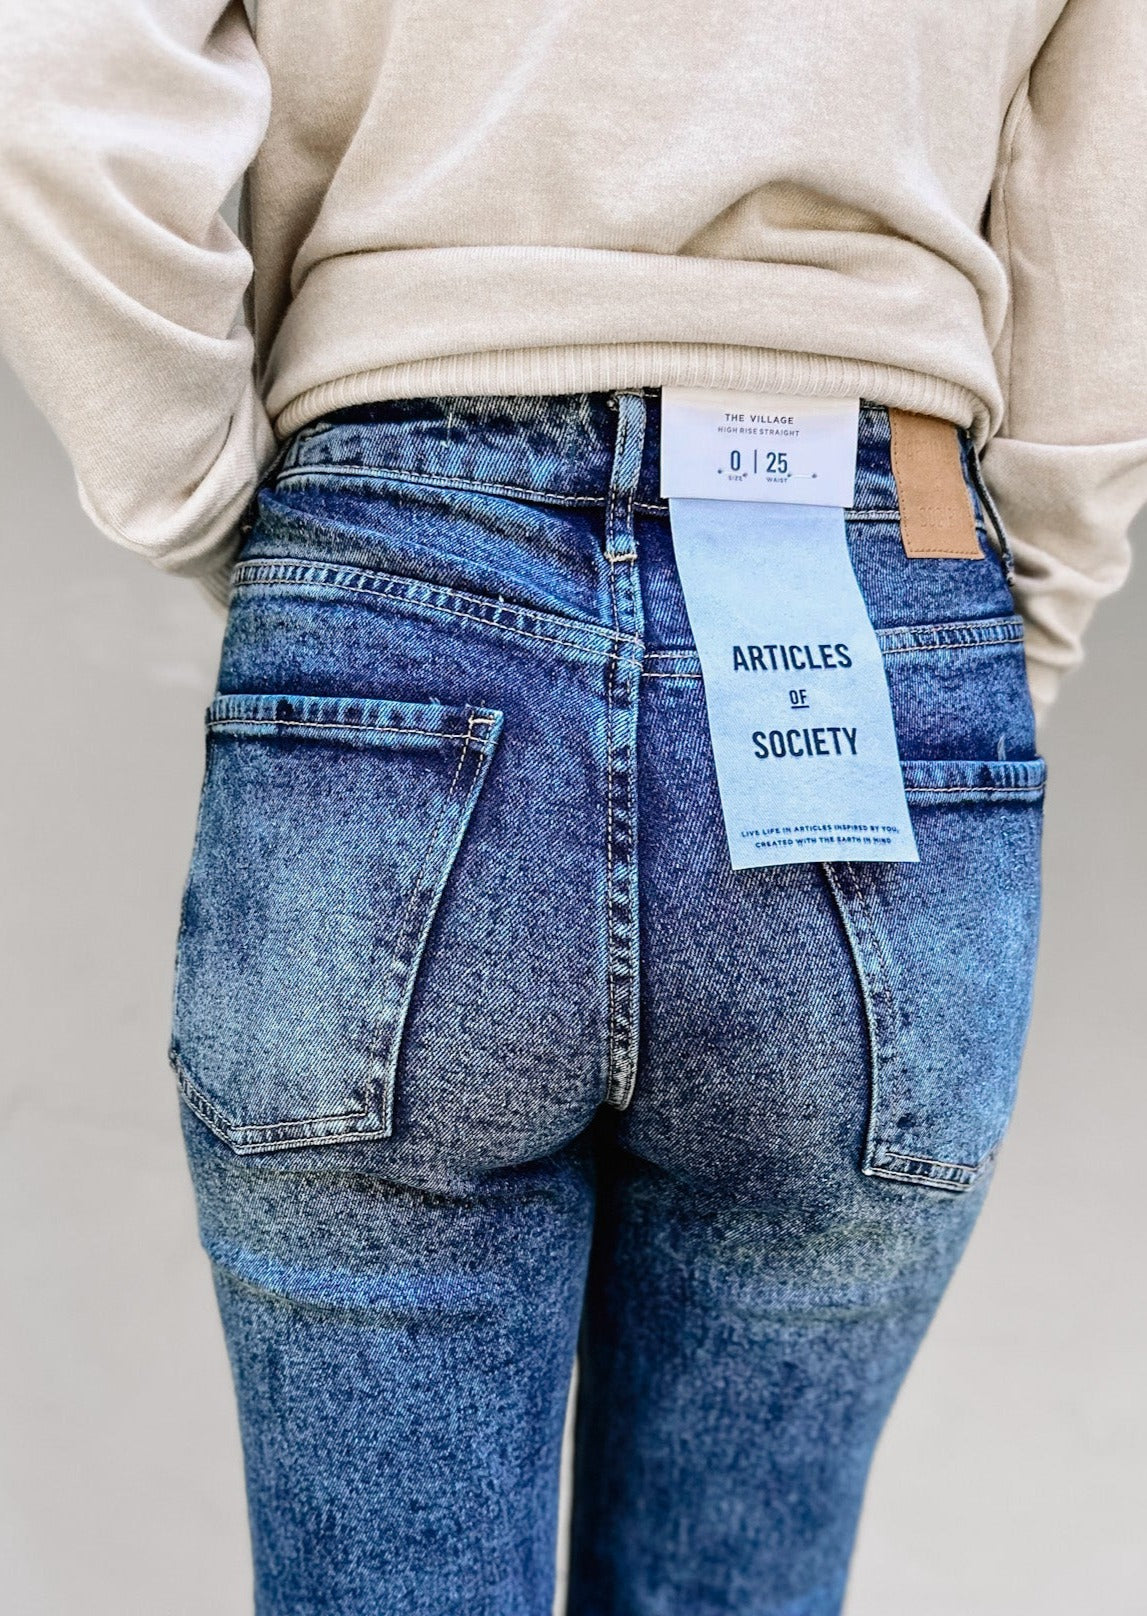 Articles of Society: The Village Jeans